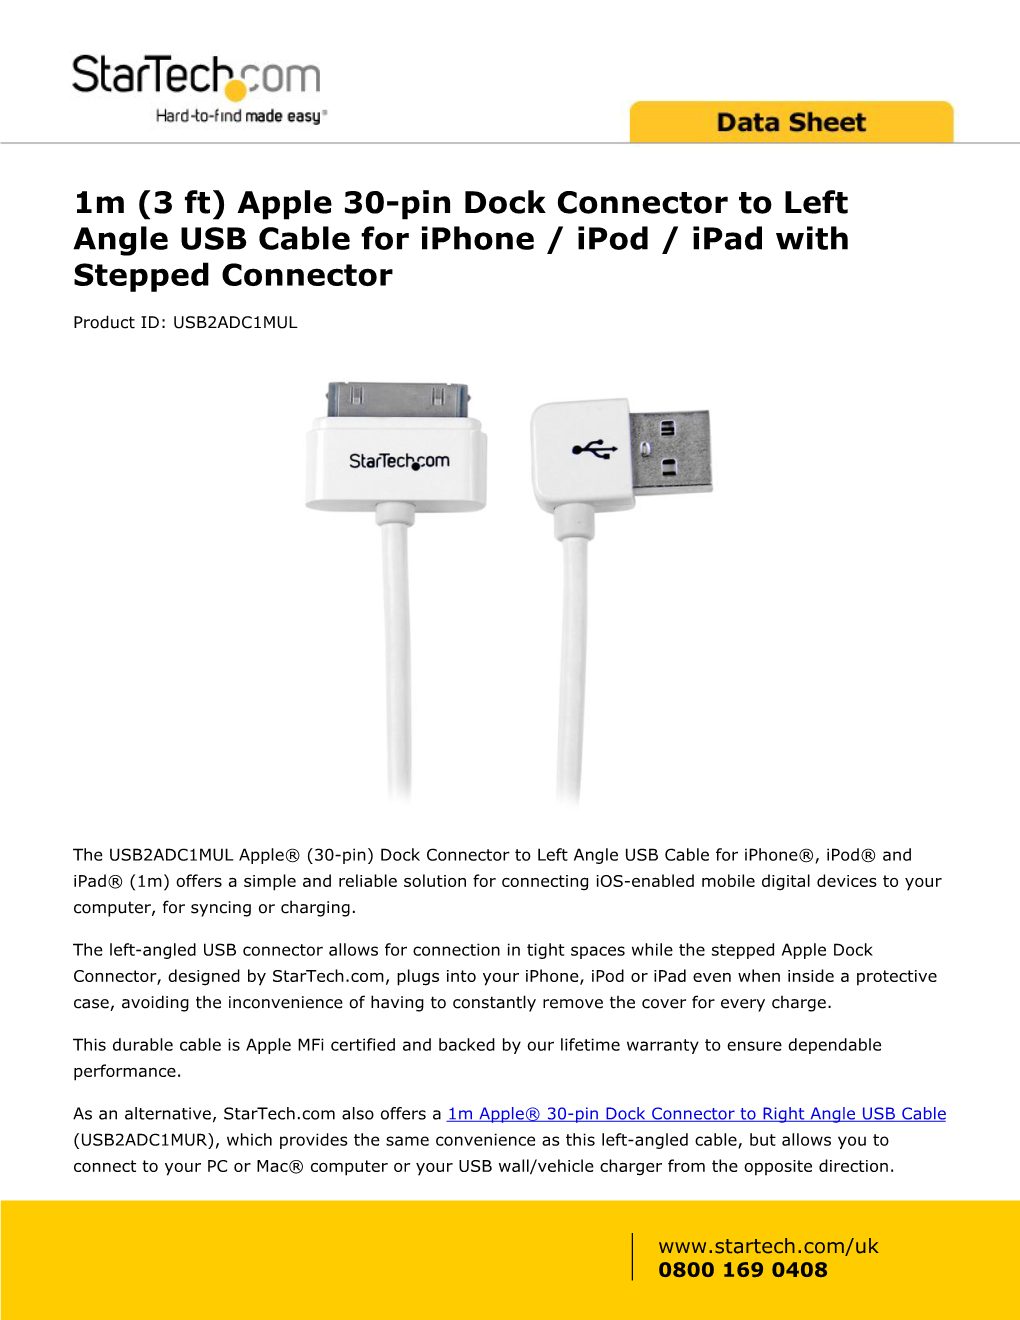 1M (3 Ft) Apple 30-Pin Dock Connector to Left Angle USB Cable for Iphone / Ipod / Ipad with Stepped Connector